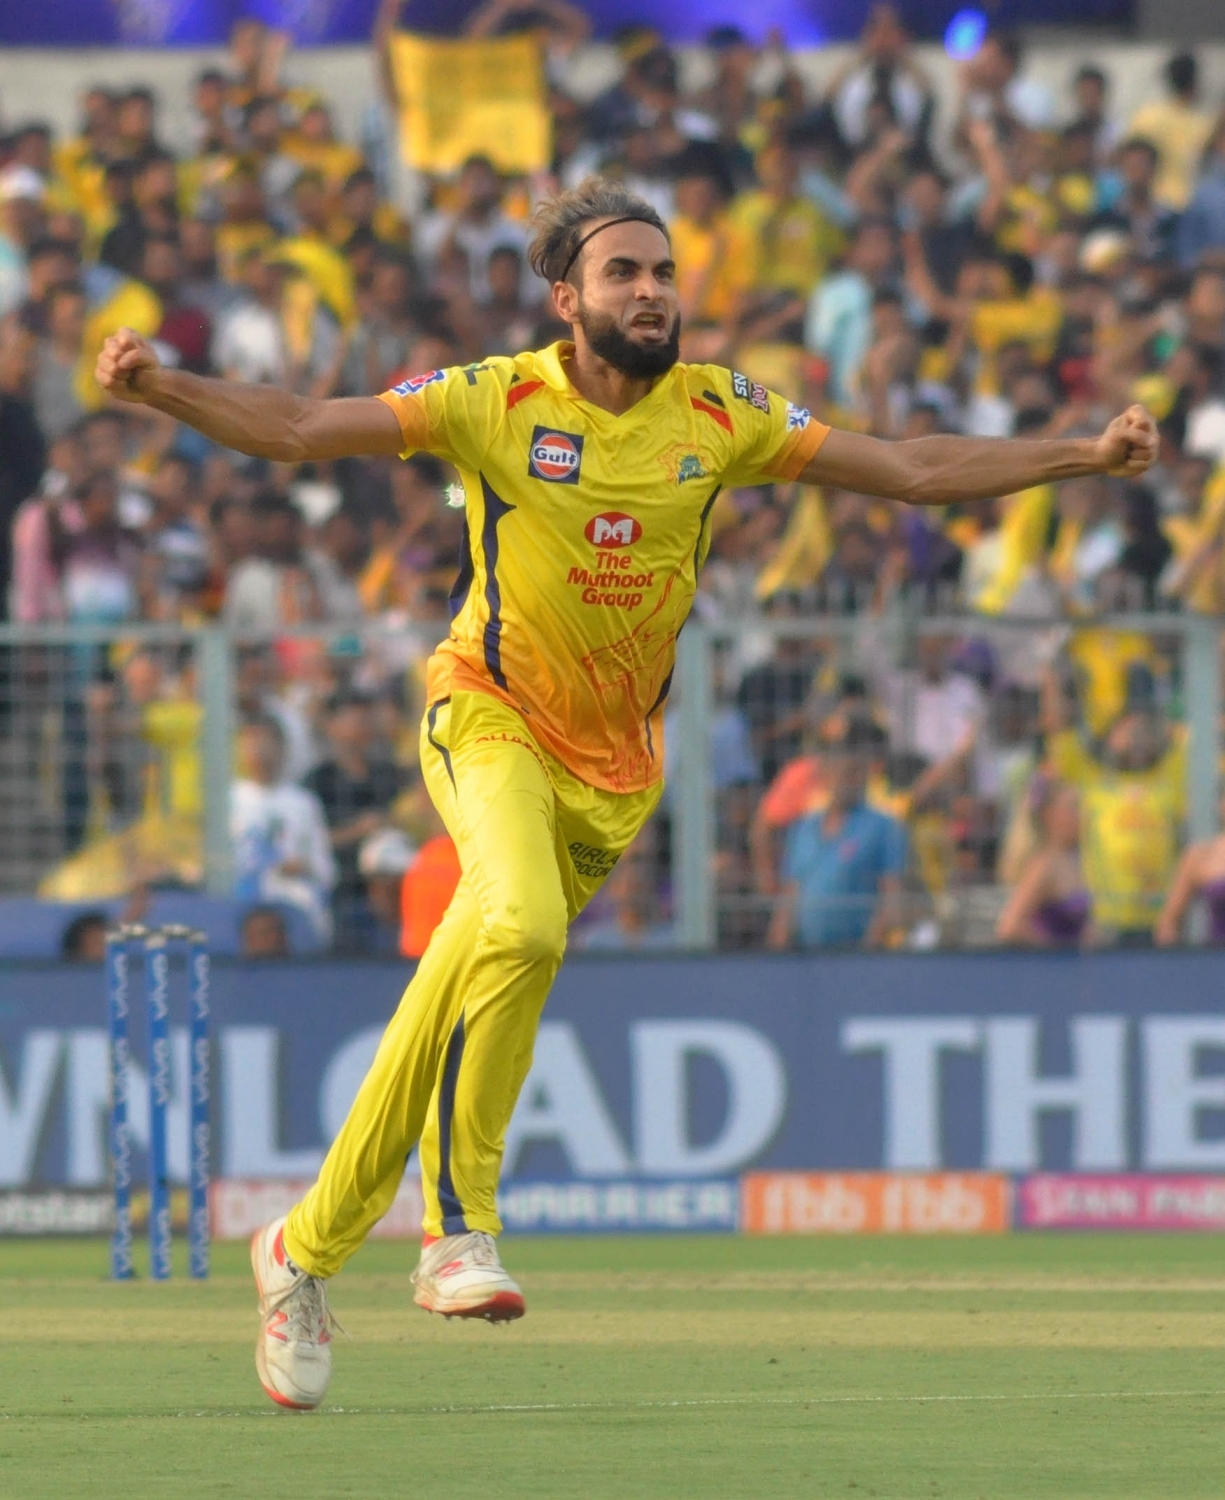 IPL 2019: Imran Tahir gives credit for his success to MS Dhoni's